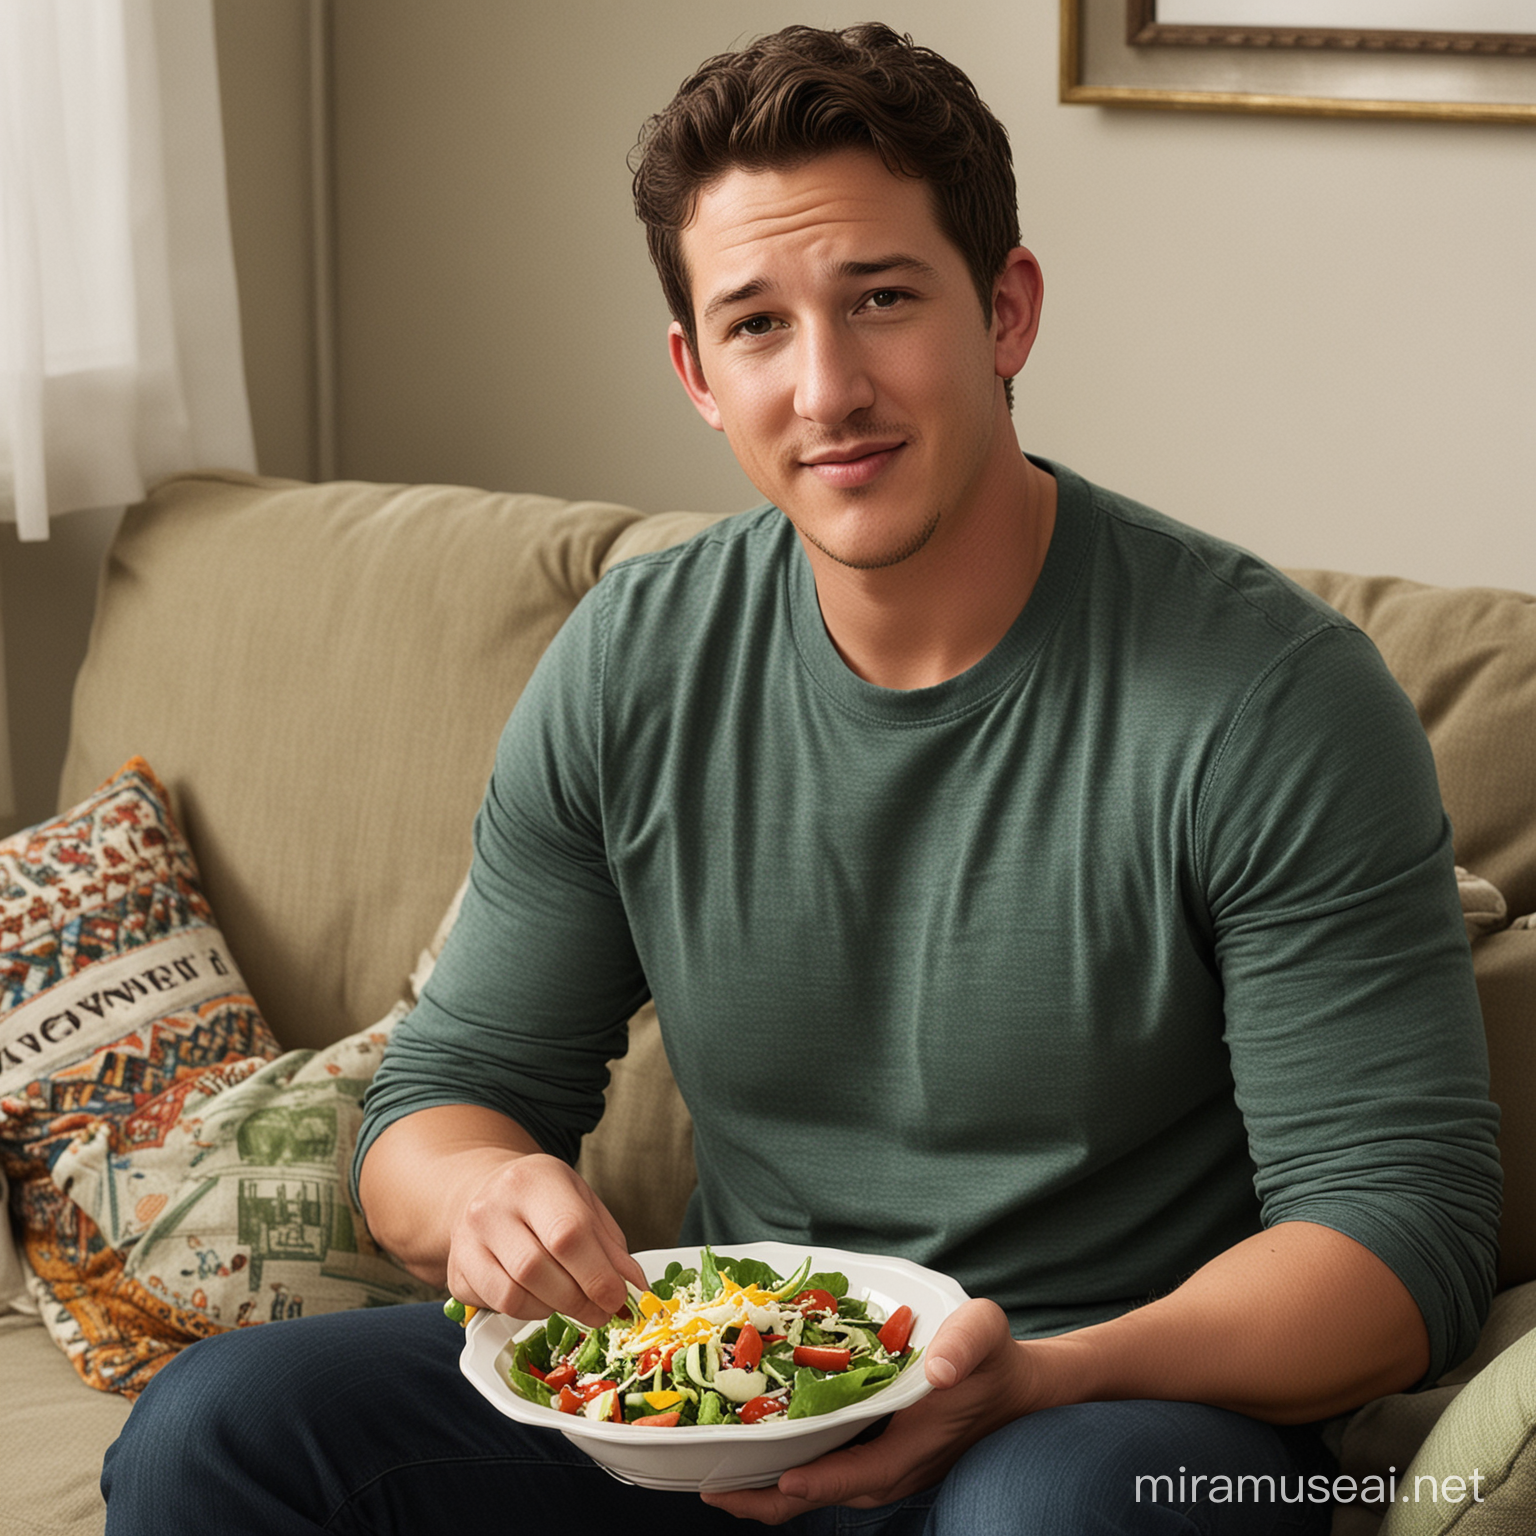 Actor Miles Teller Enjoying Homemade Salad with Newmans Own Dressing